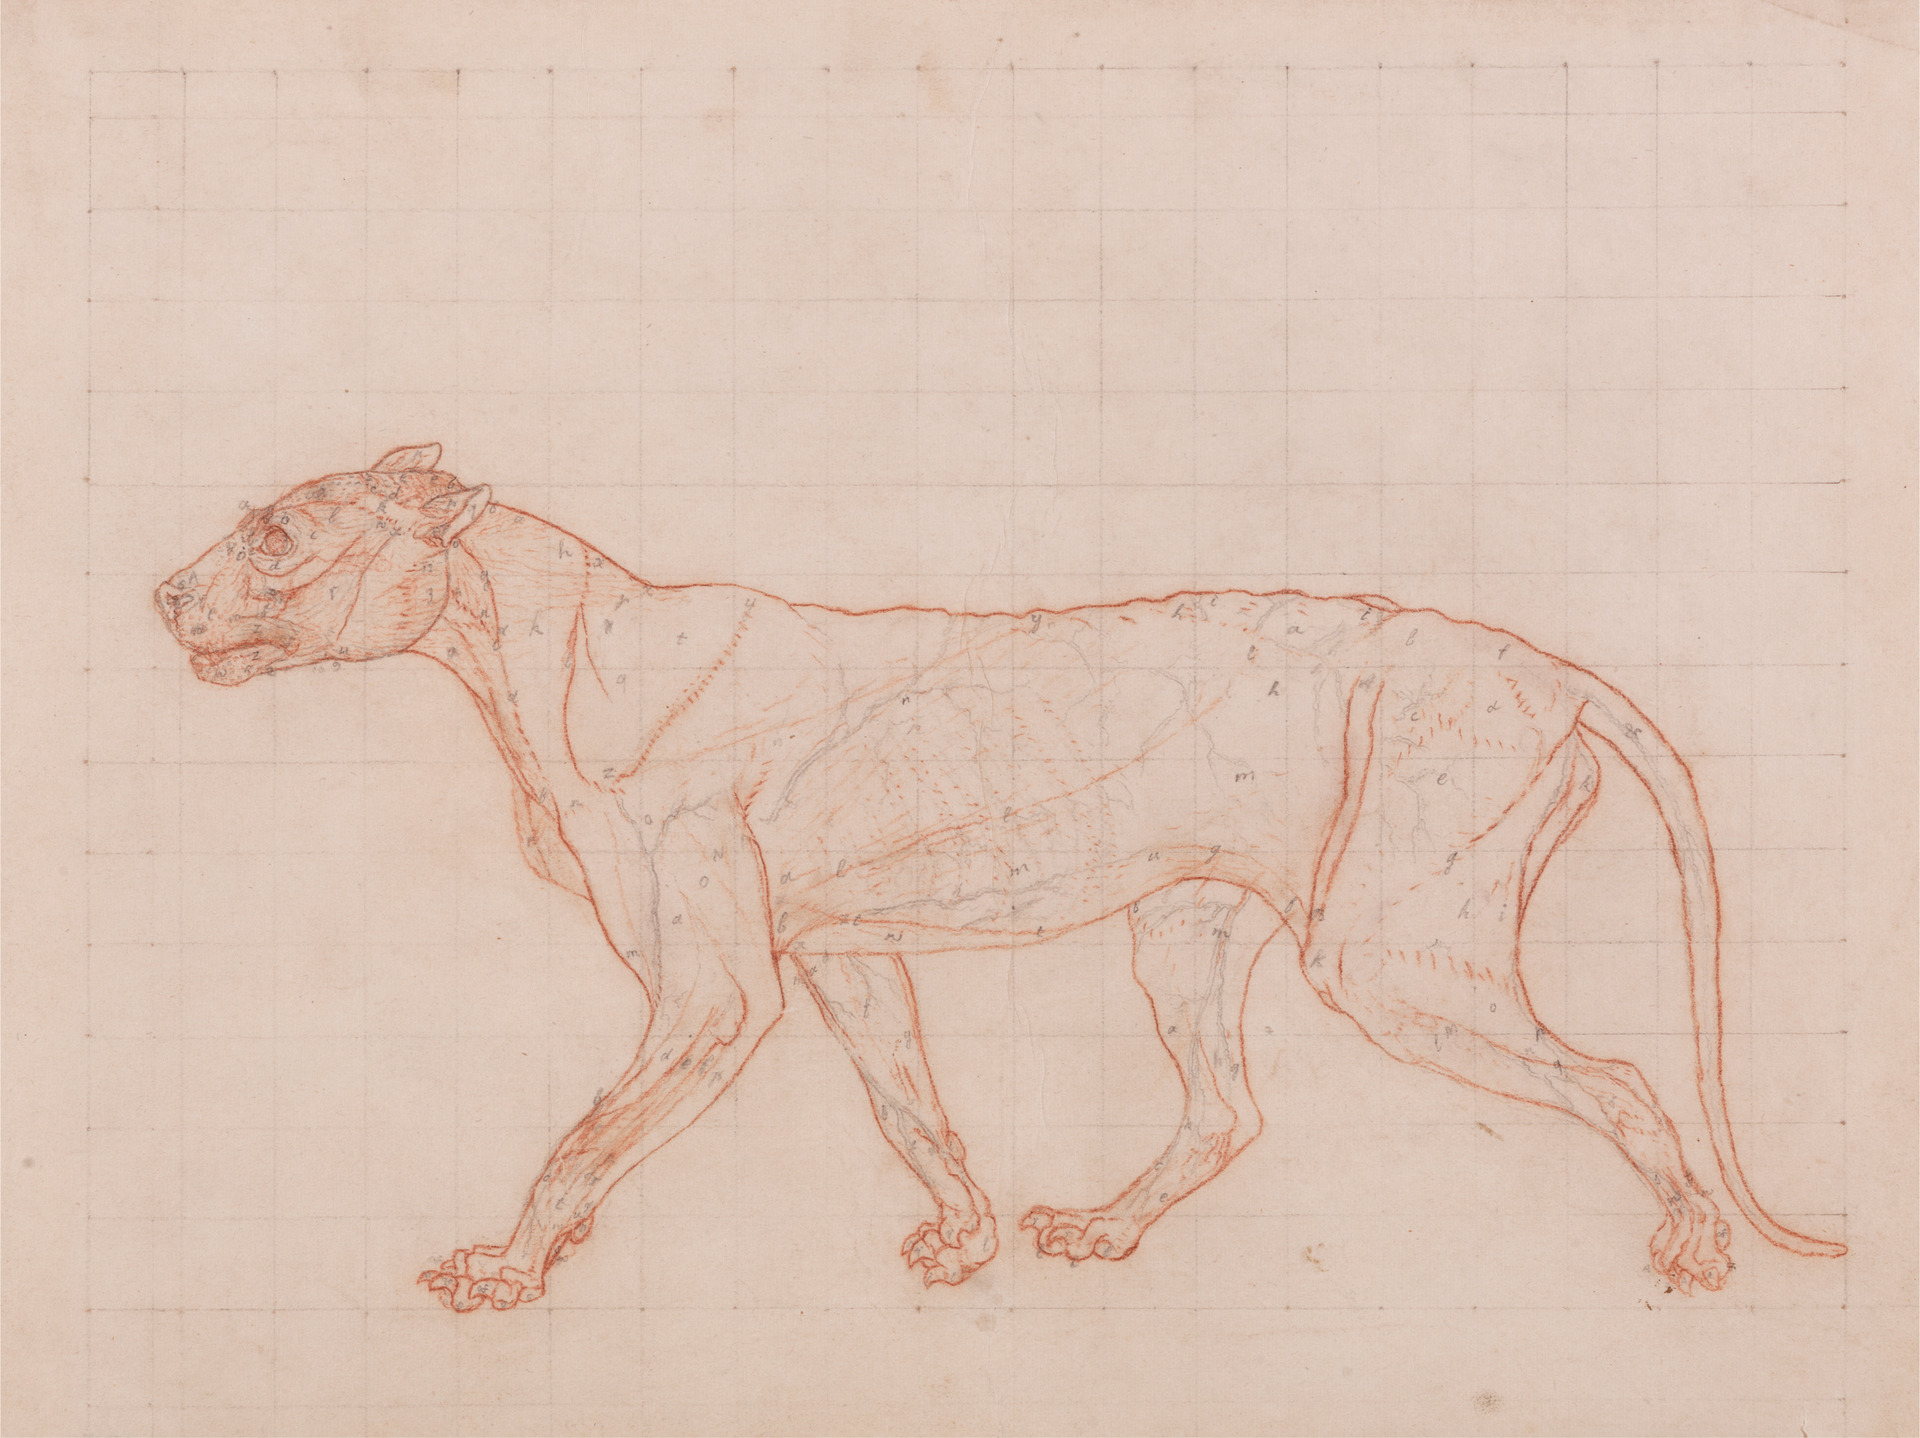 George Stubbs. Tiger Body, Lateral View. 